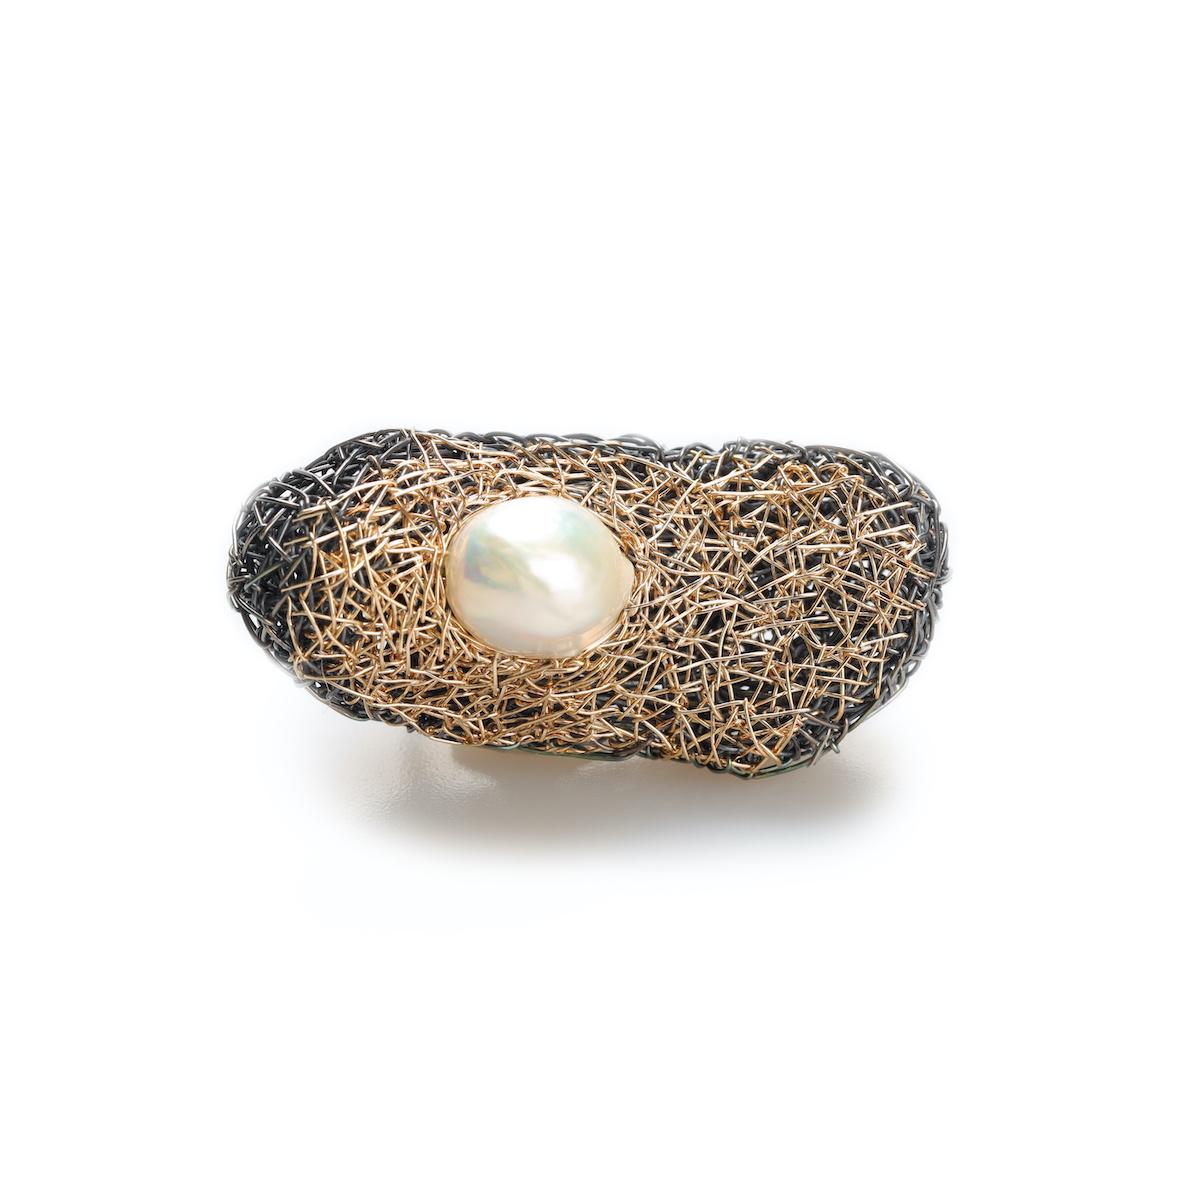 Contemporary Pearl Cocktail Ring in Blackend Silver and Yellow Gold by the Artist Herself